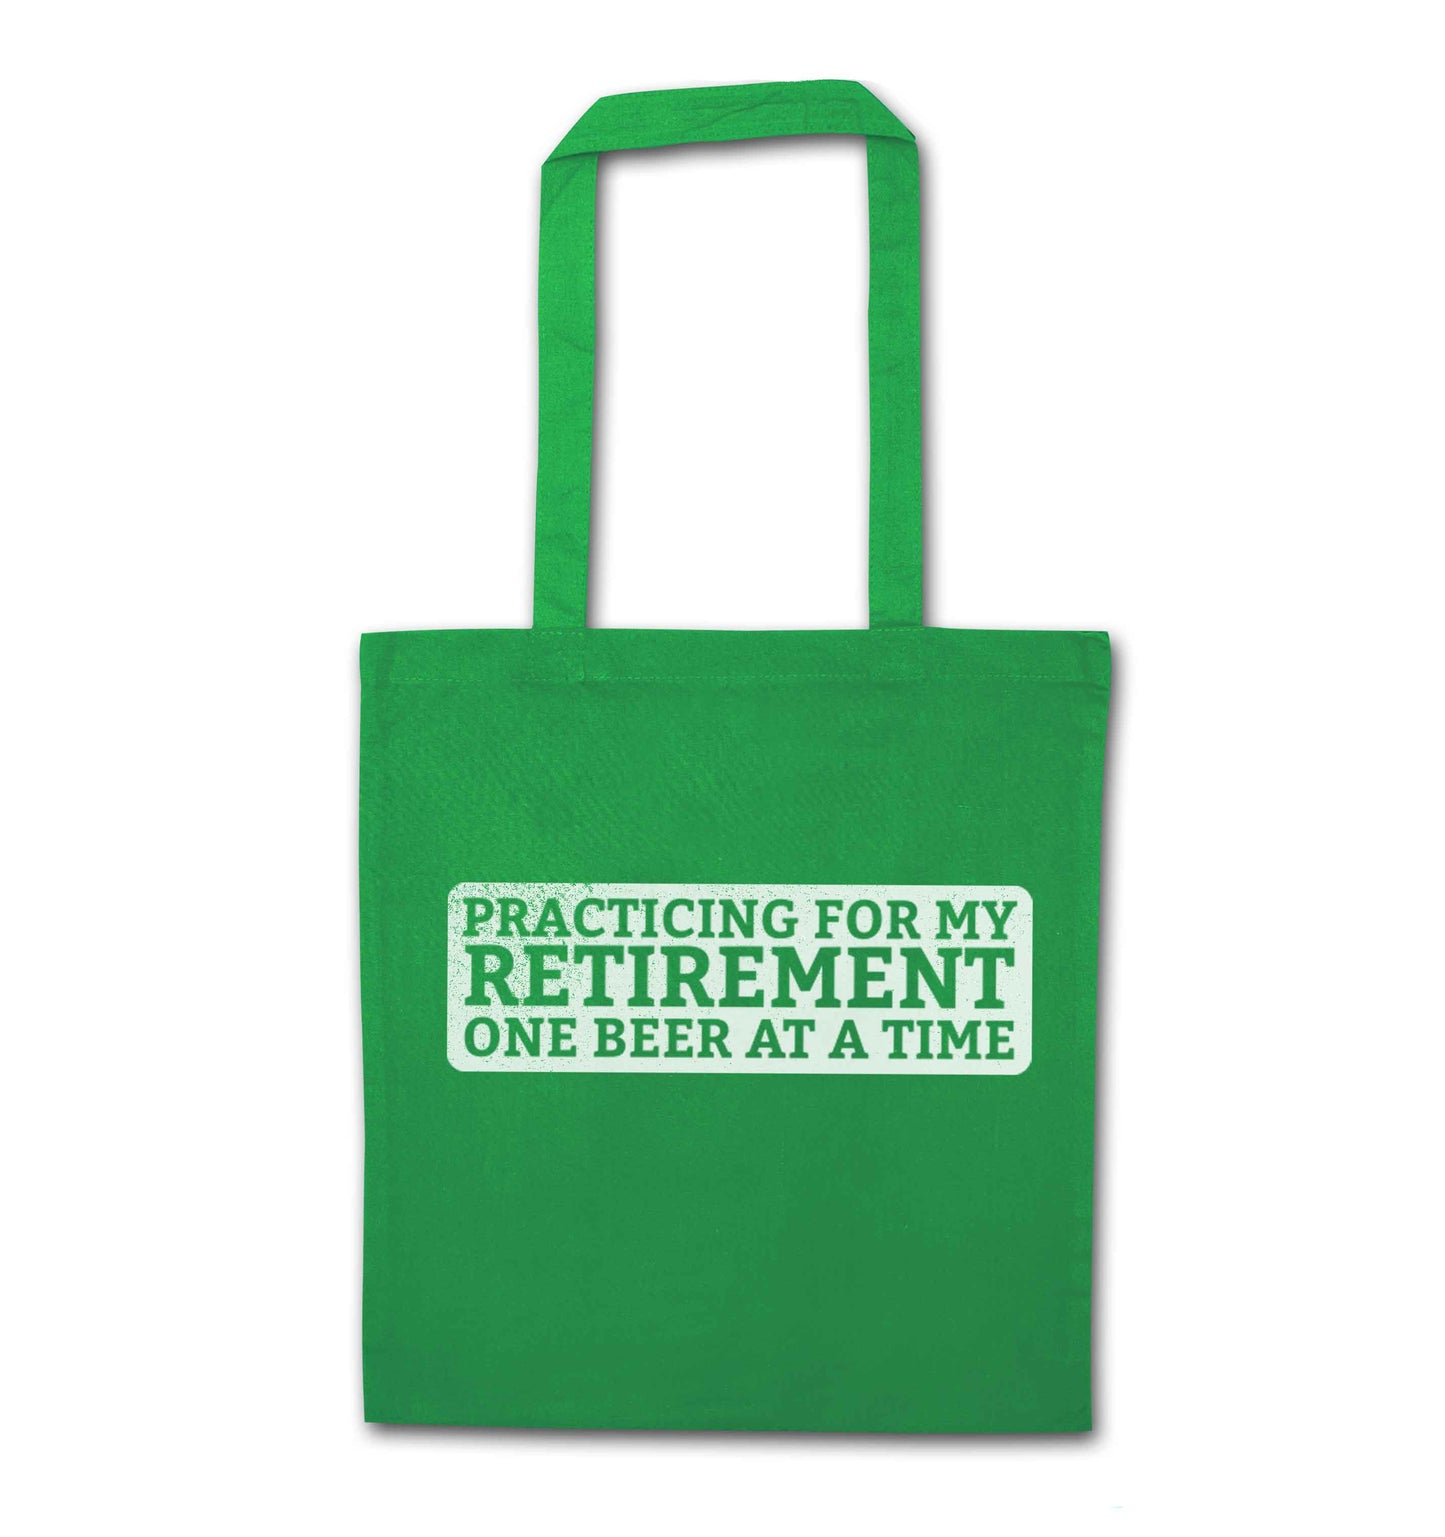 Practicing for my Retirement one Beer at a Time green tote bag